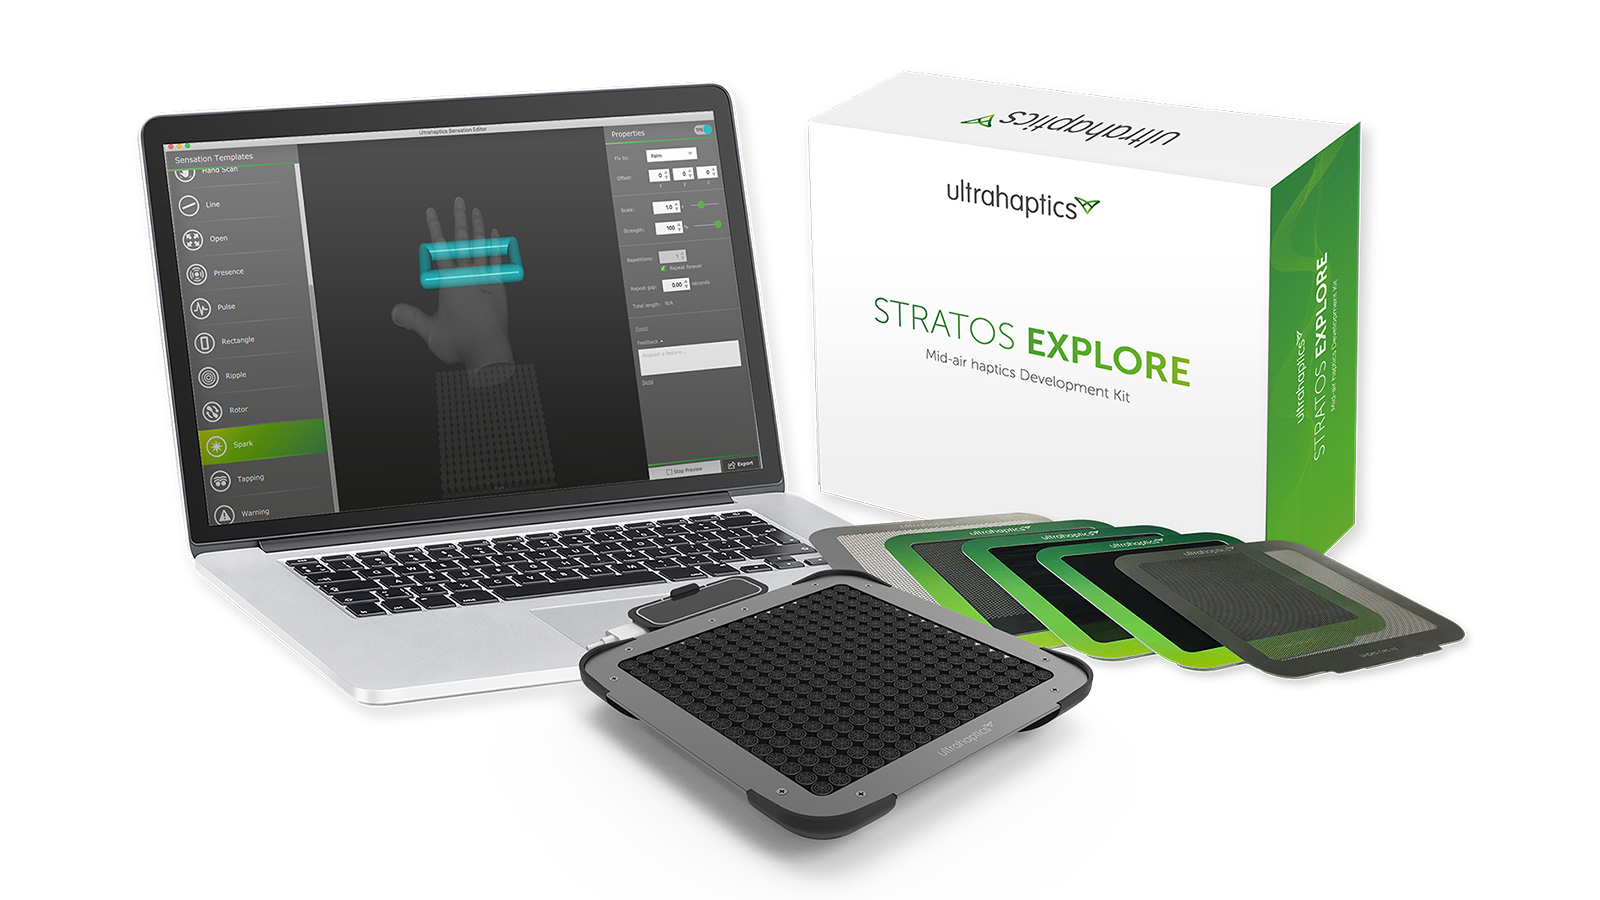 STRATOS Explore product shot with laptop